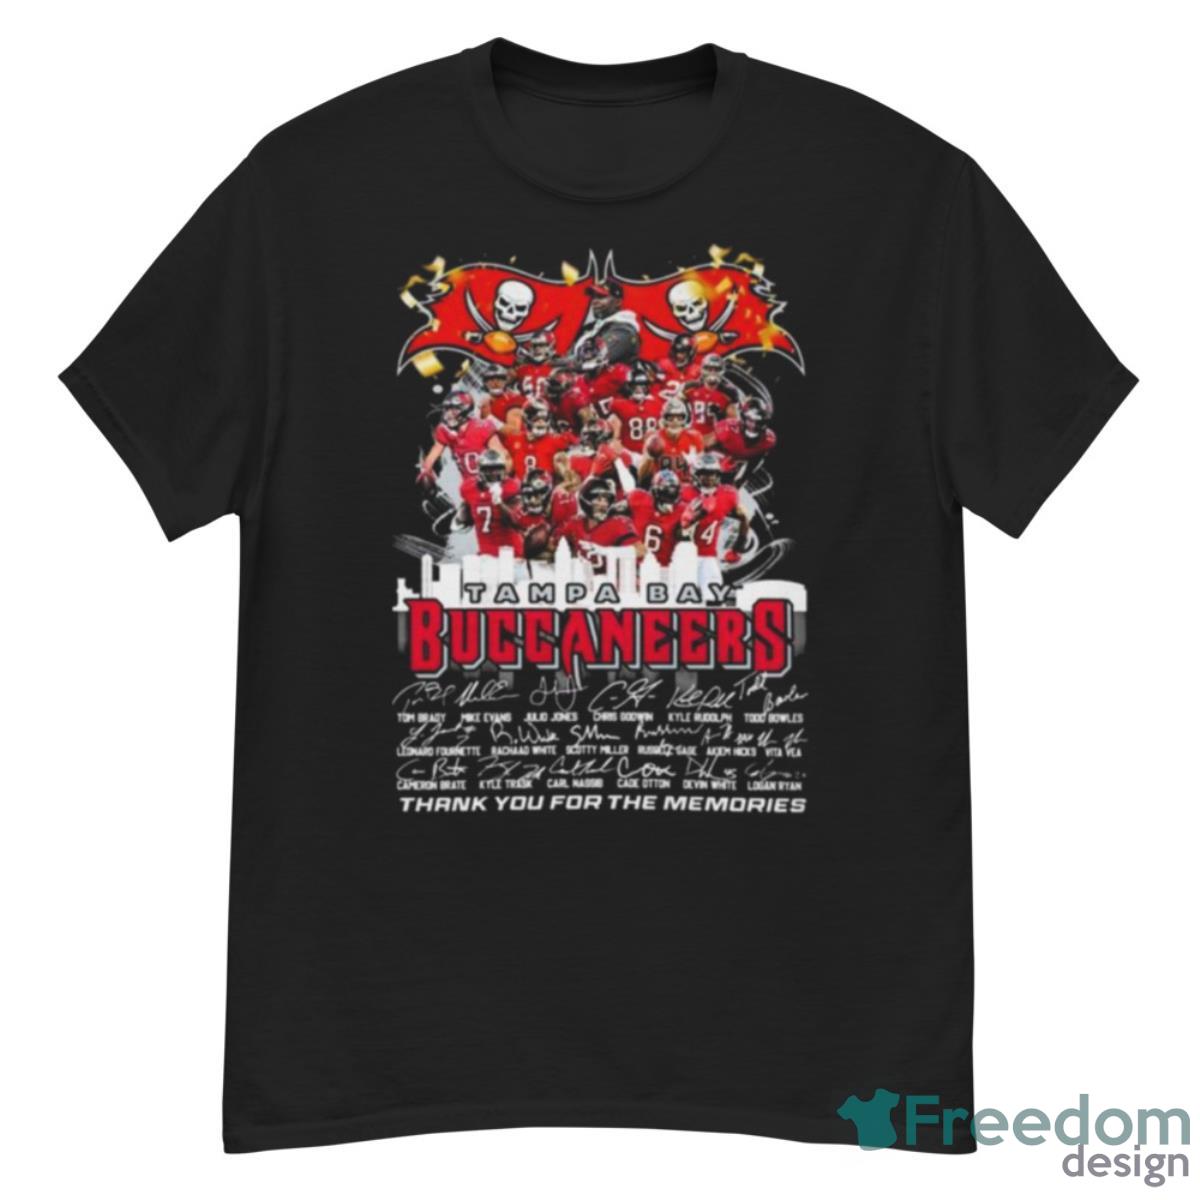 Hot Tampa Bay Buccaneers Name Player Signatures Thank You For The Memories 2023 Shirt - G500 Men’s Classic T-Shirt